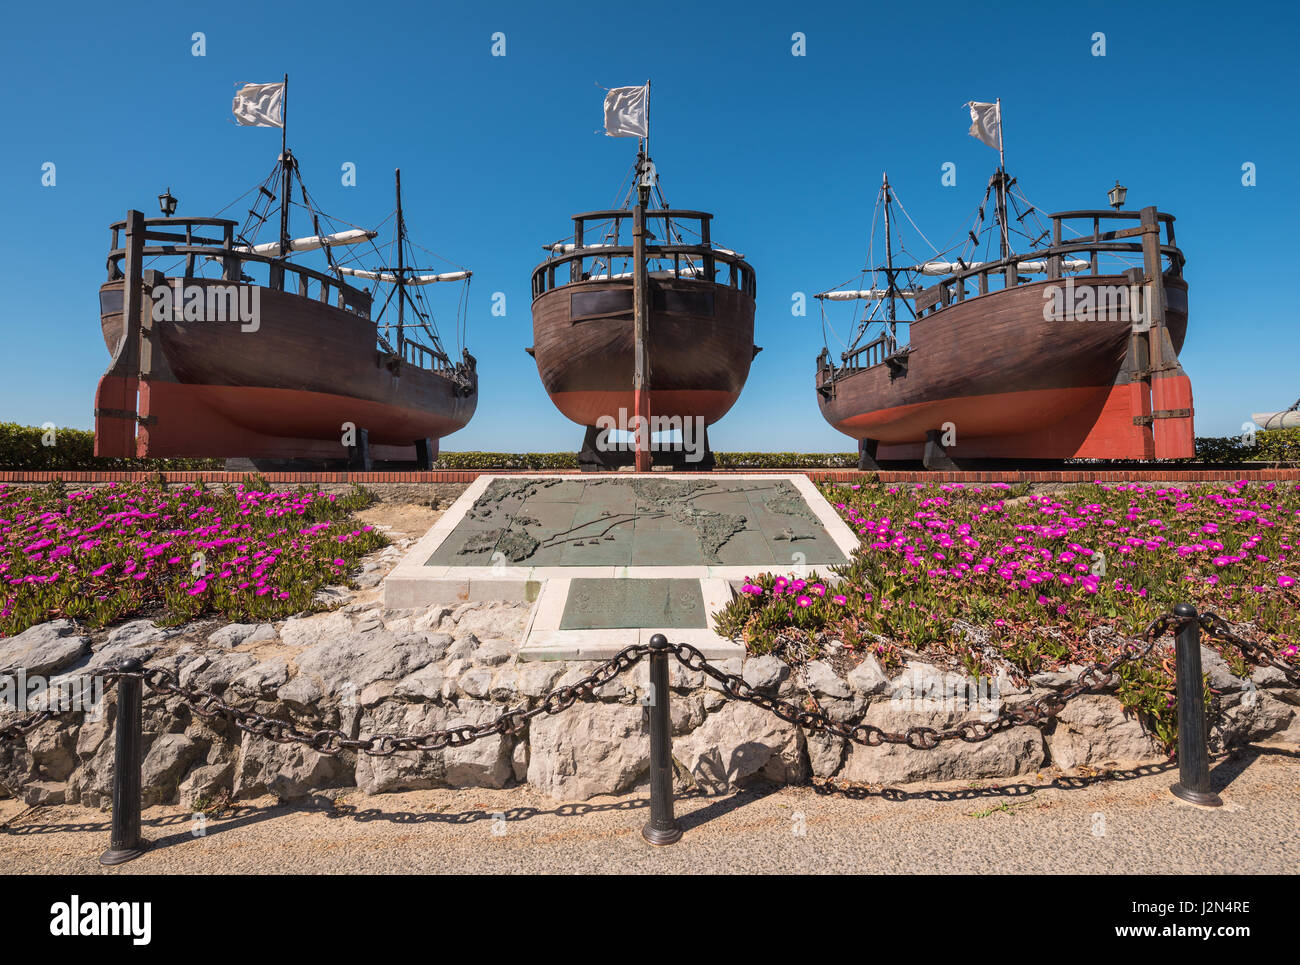 Santander, Spain - April 20, 2017: Monument to Christopher Colombus caravel Ships copys of America discovering, in the Magdalena park, Santander, Cant Stock Photo